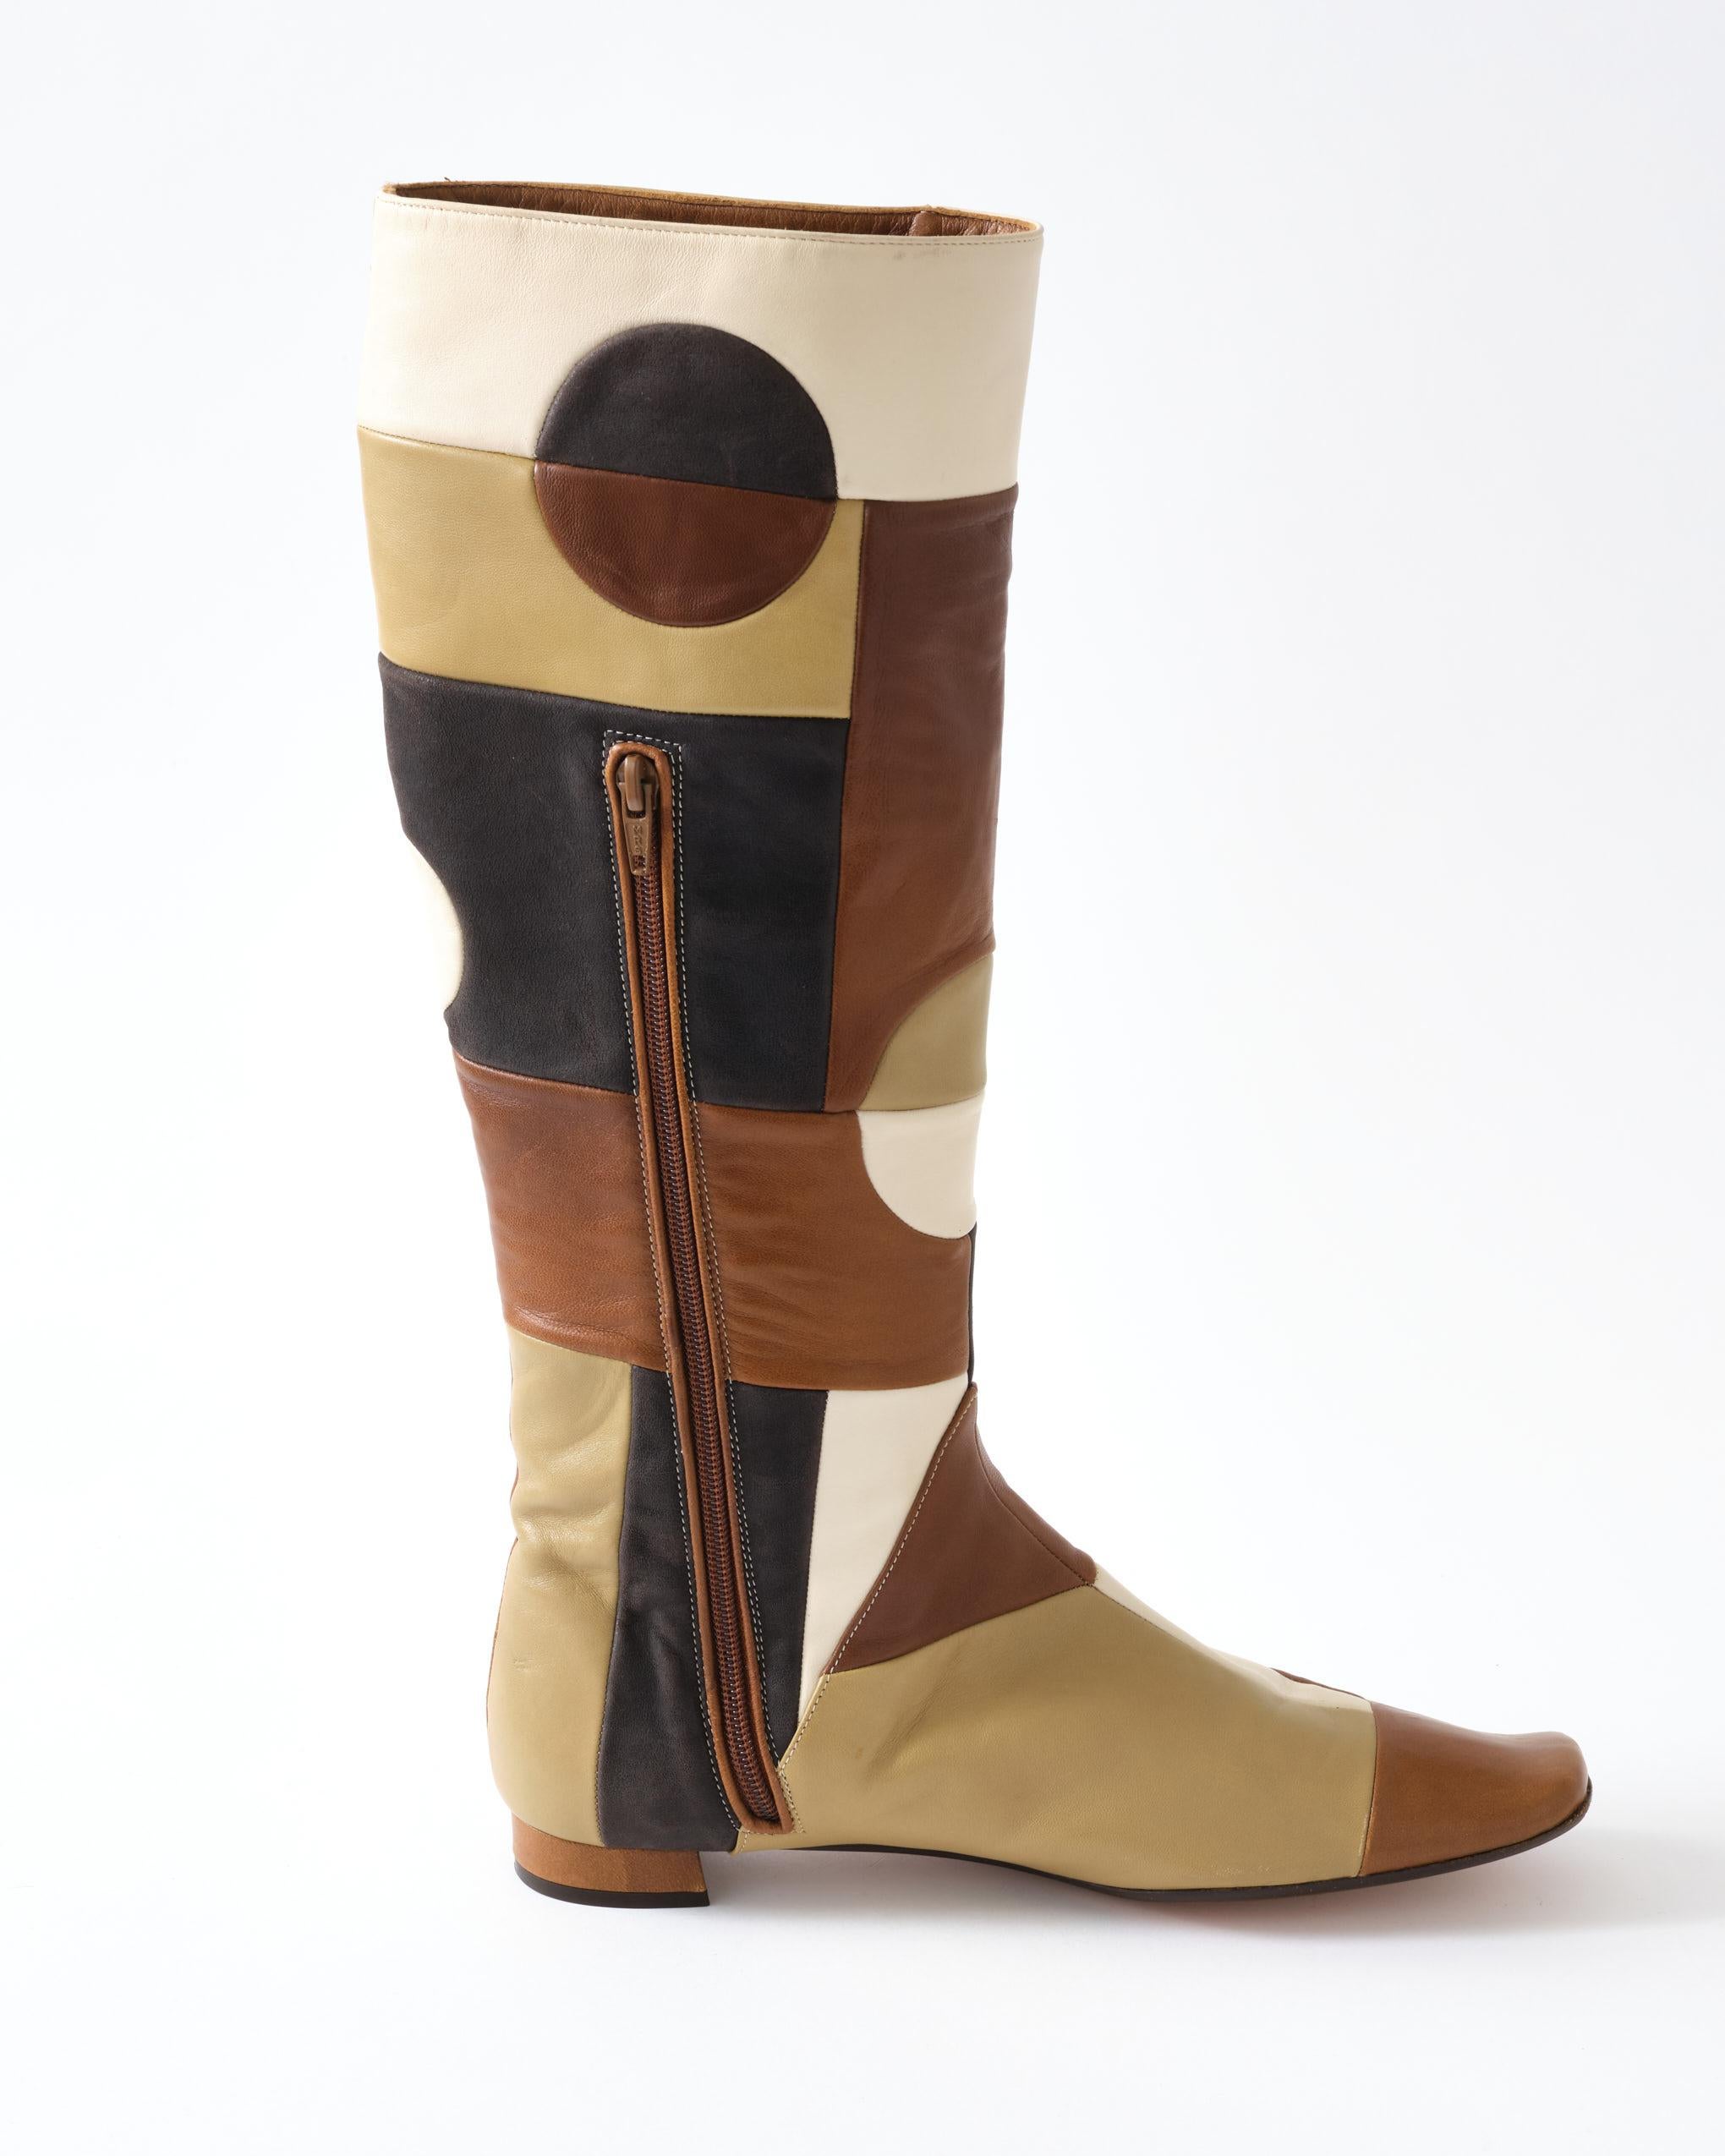 Marni Leather Boots, 1960's Style Design, Brown, Beige & Khaki, Pair of Boots In Excellent Condition For Sale In New York, NY